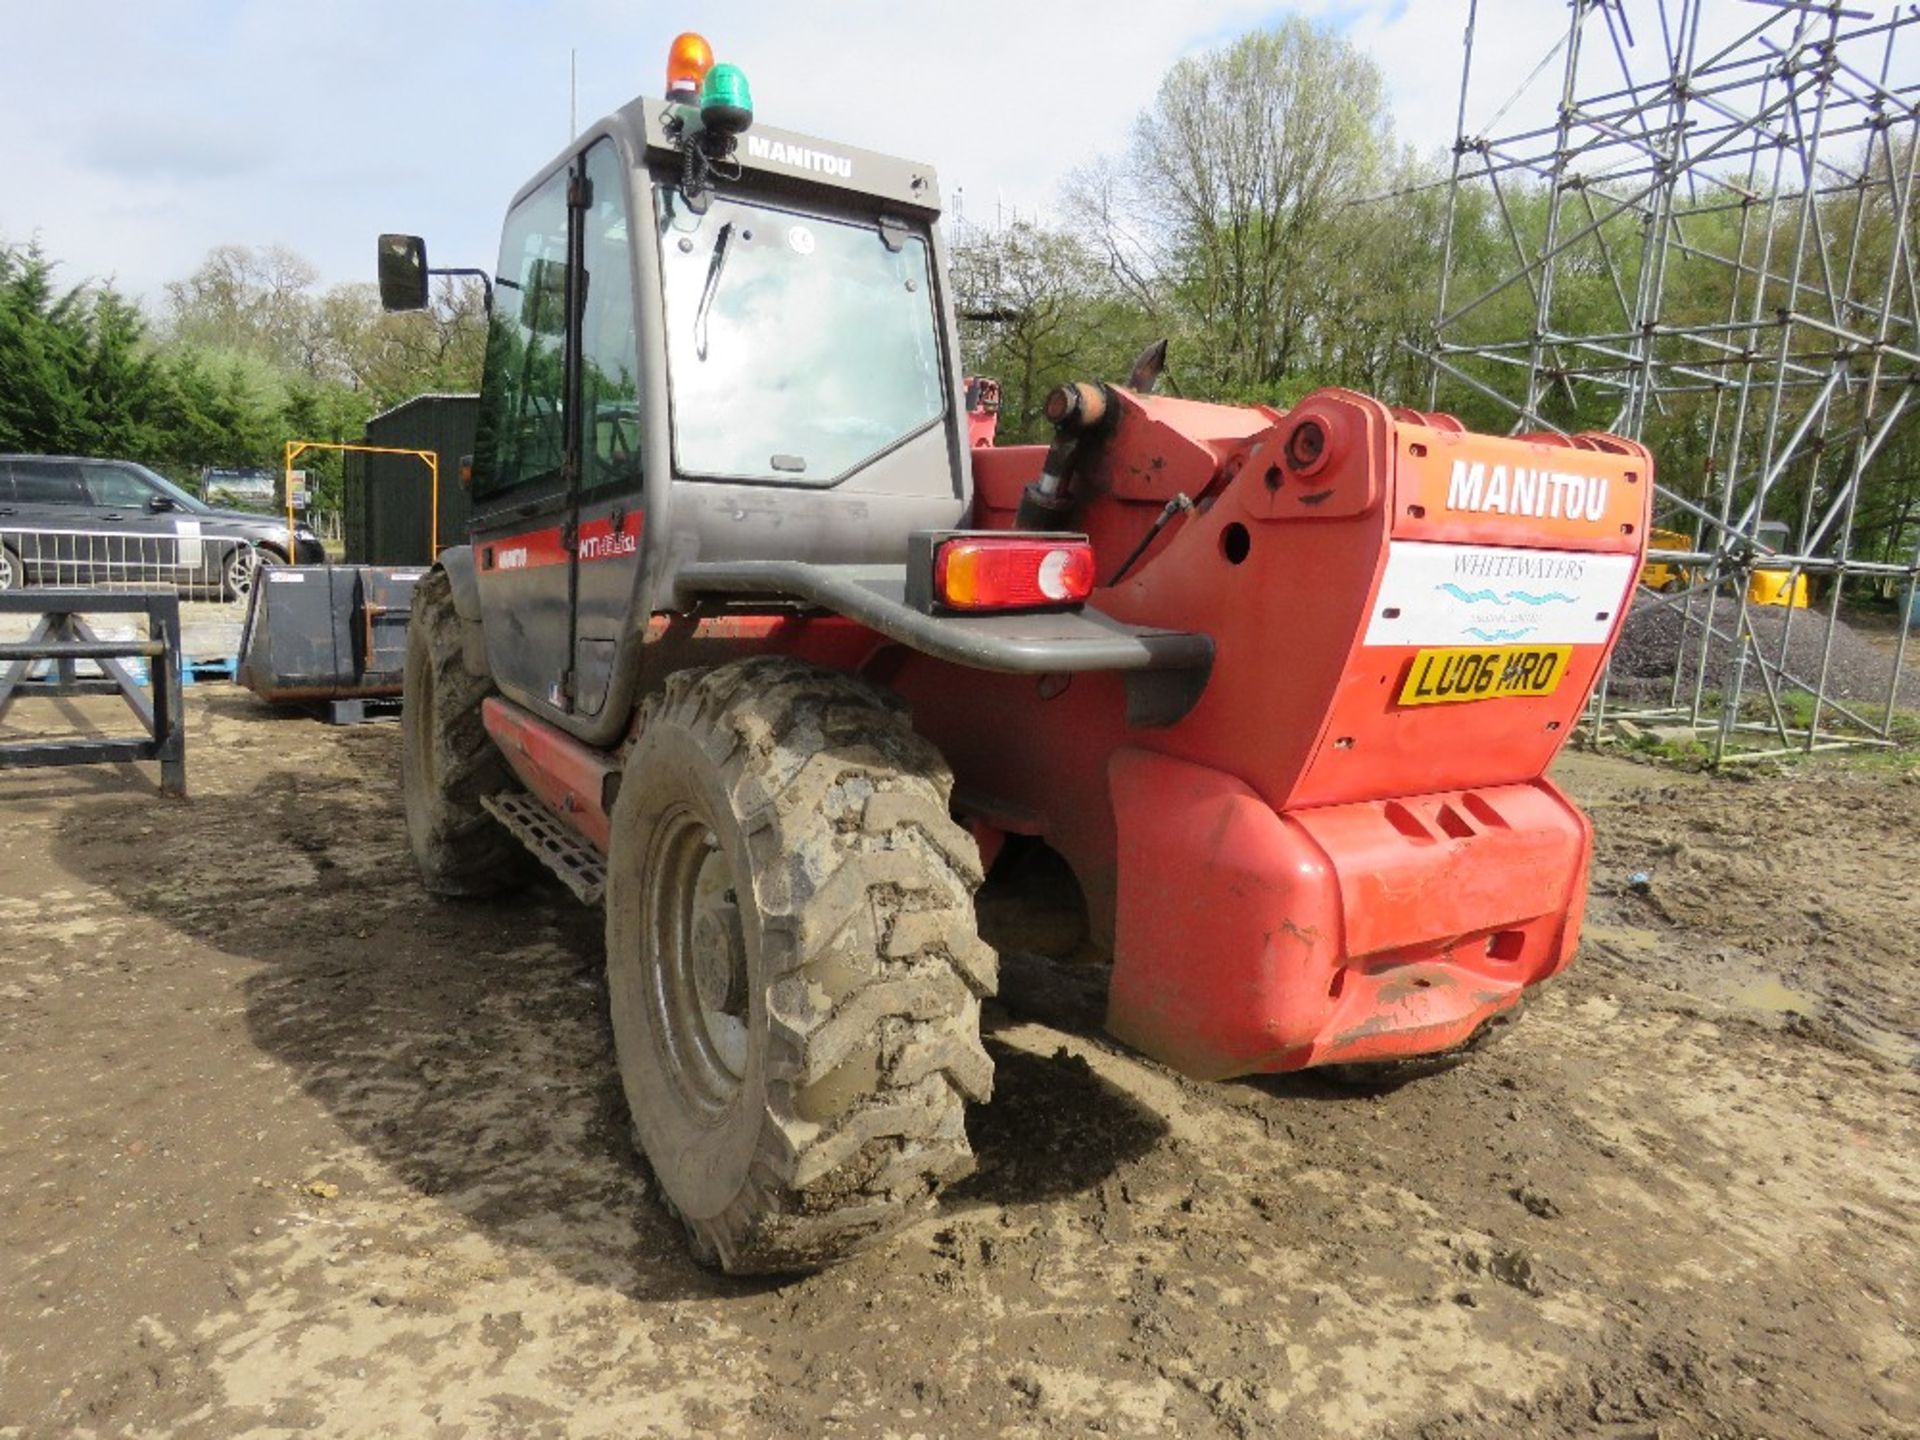 MANITOU 1435SL TELESCOPIC HANDLER REG:LU06 MRO (LOG BOOK TO APPLY FOR). 7965 REC HRS. YEAR 2006 BUIL - Image 4 of 14